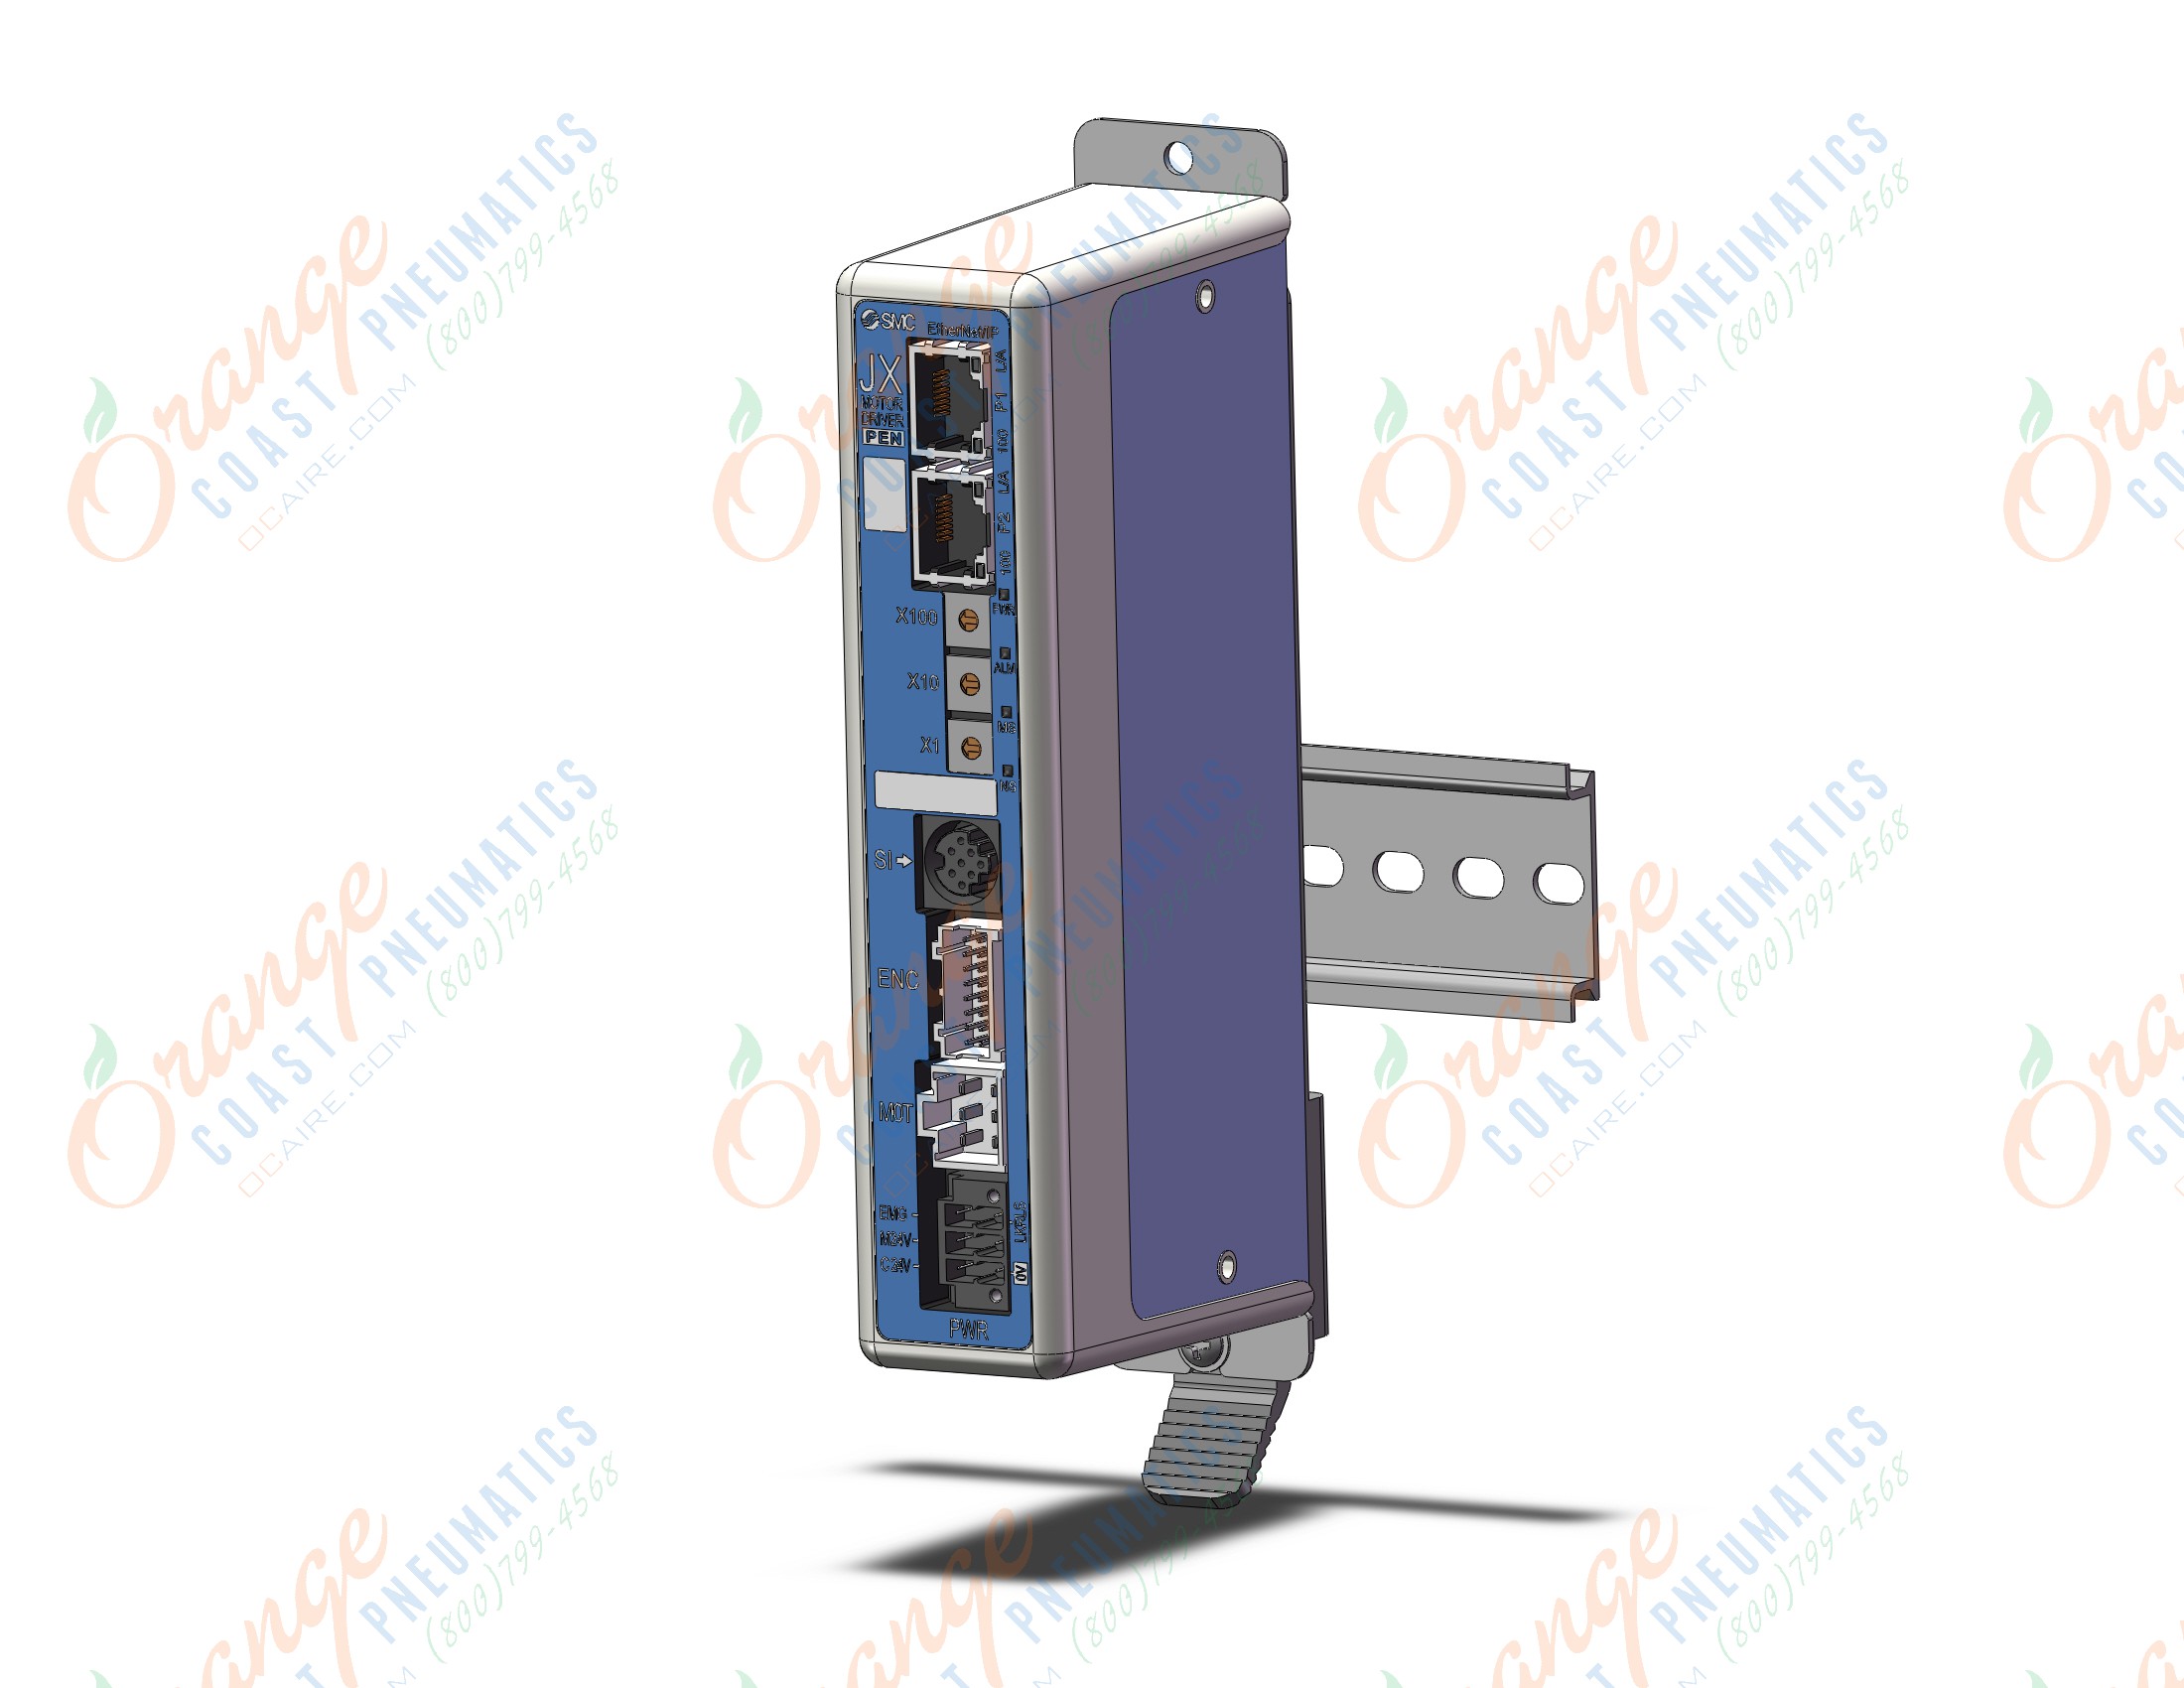 SMC JXC918-LEYG25LC-100 ethernet/ip direct connect, ELECTRIC ACTUATOR CONTROLLER